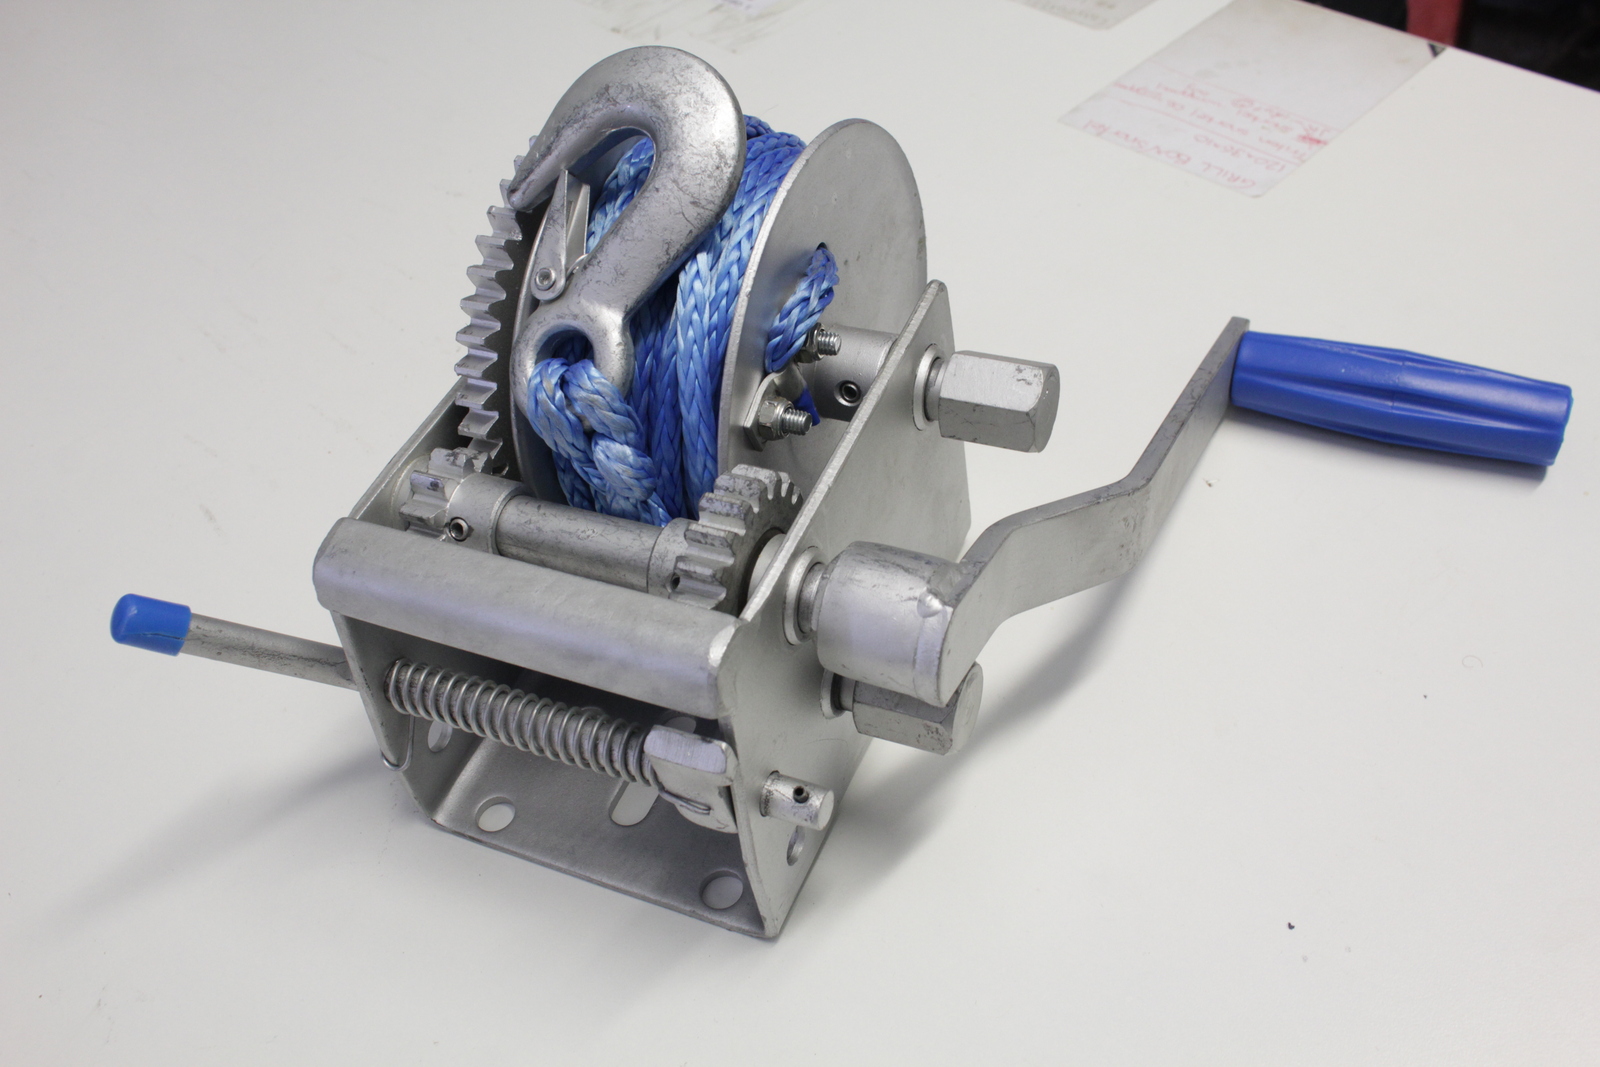 Cobra 4x4 3 Speed Gear Manual Hand WInch Synthetic Rope